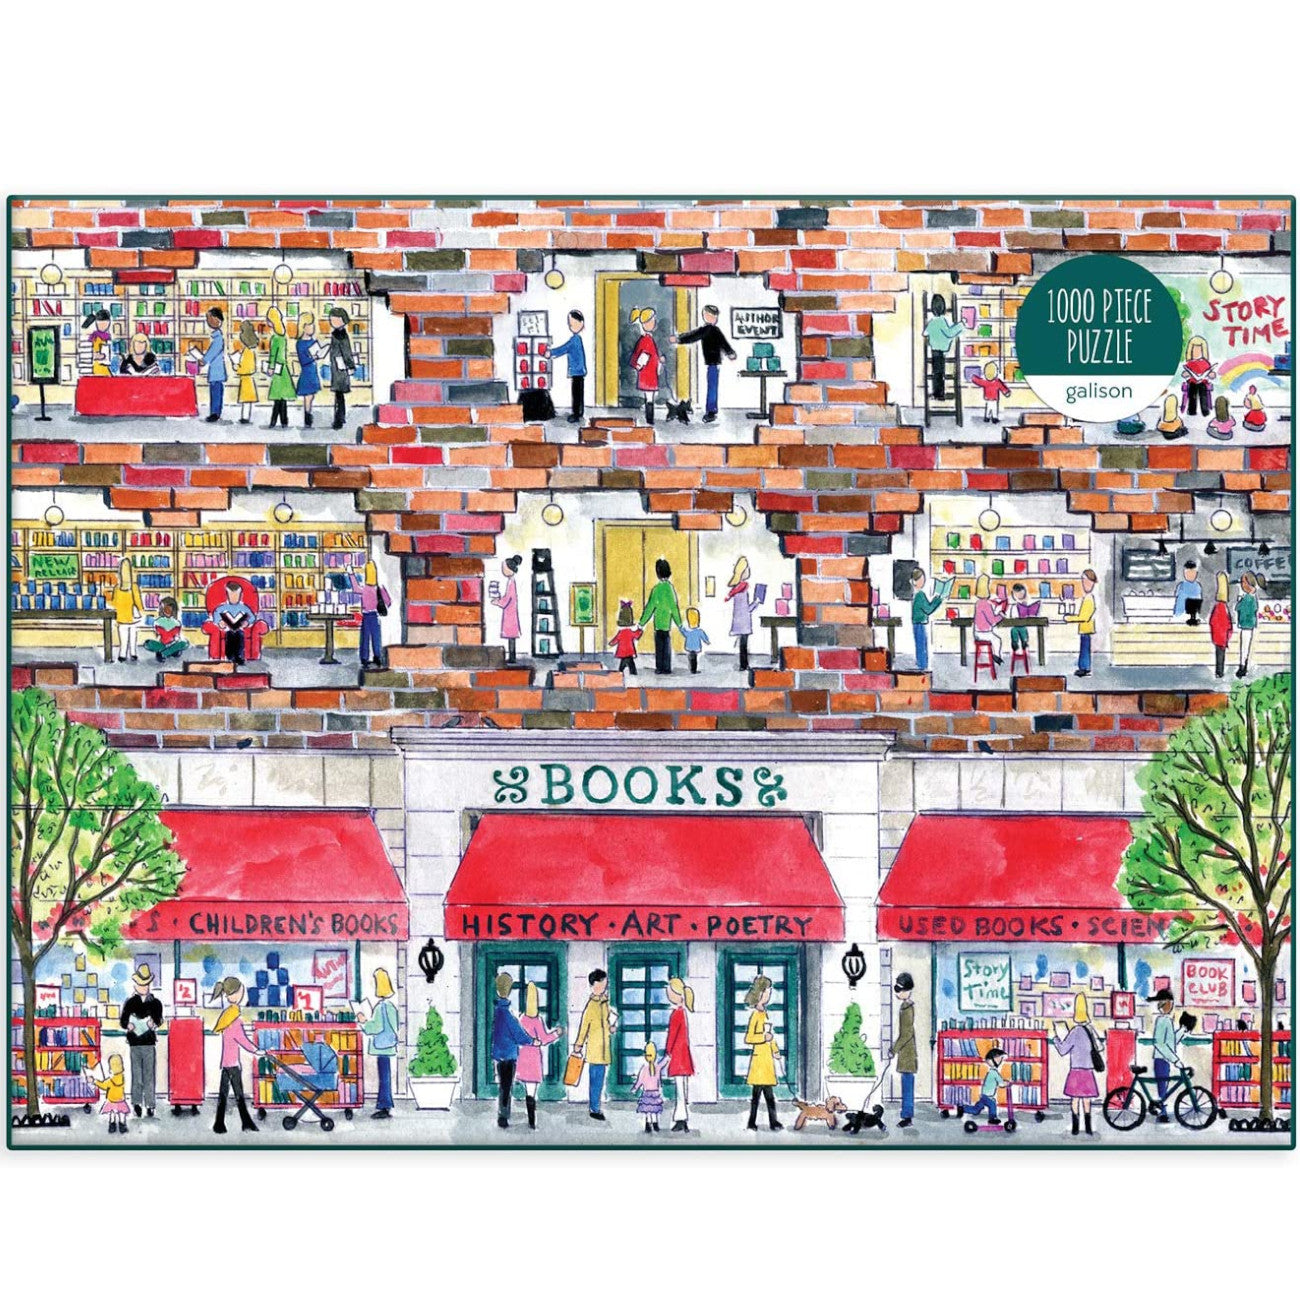 Gallison Puzzle Day at the Bookstore 1,000 pc 4